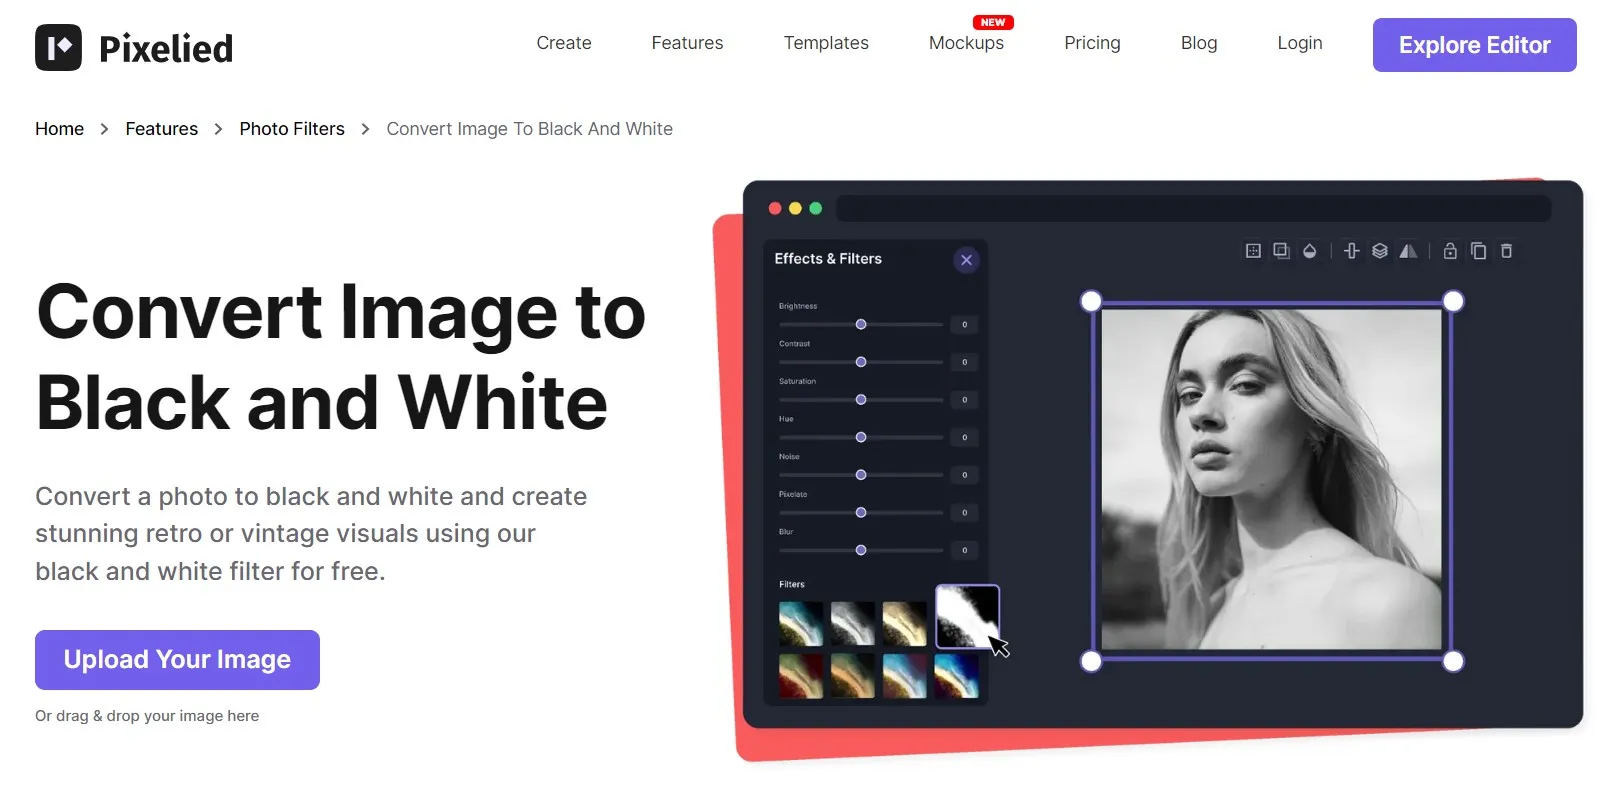 pixelied image editor which convert image to black and white